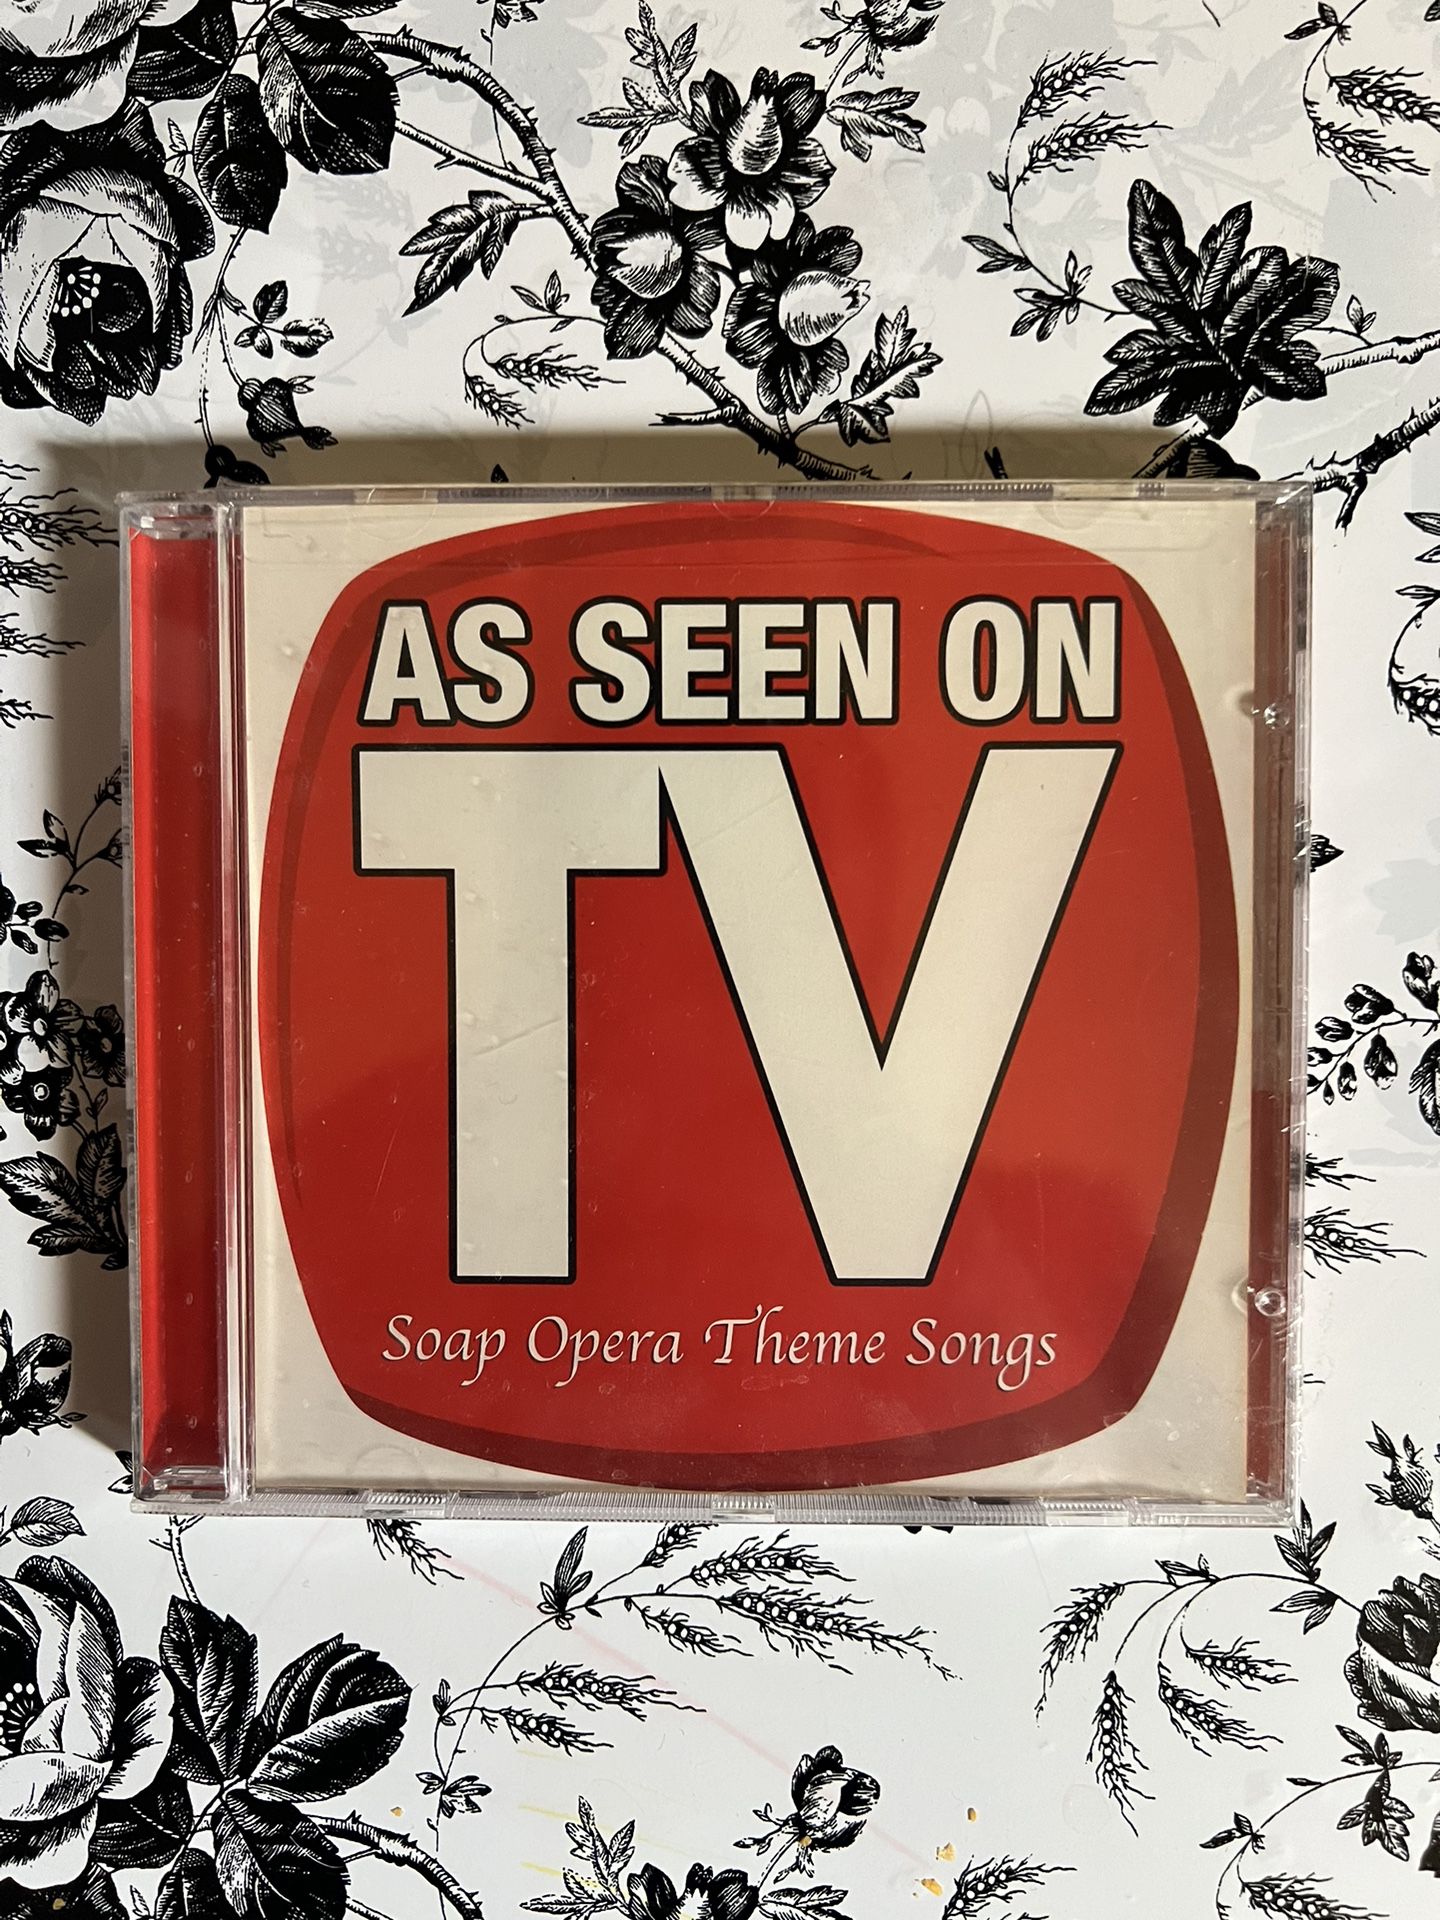 As Seen On TV Soap Opera Theme Songs New